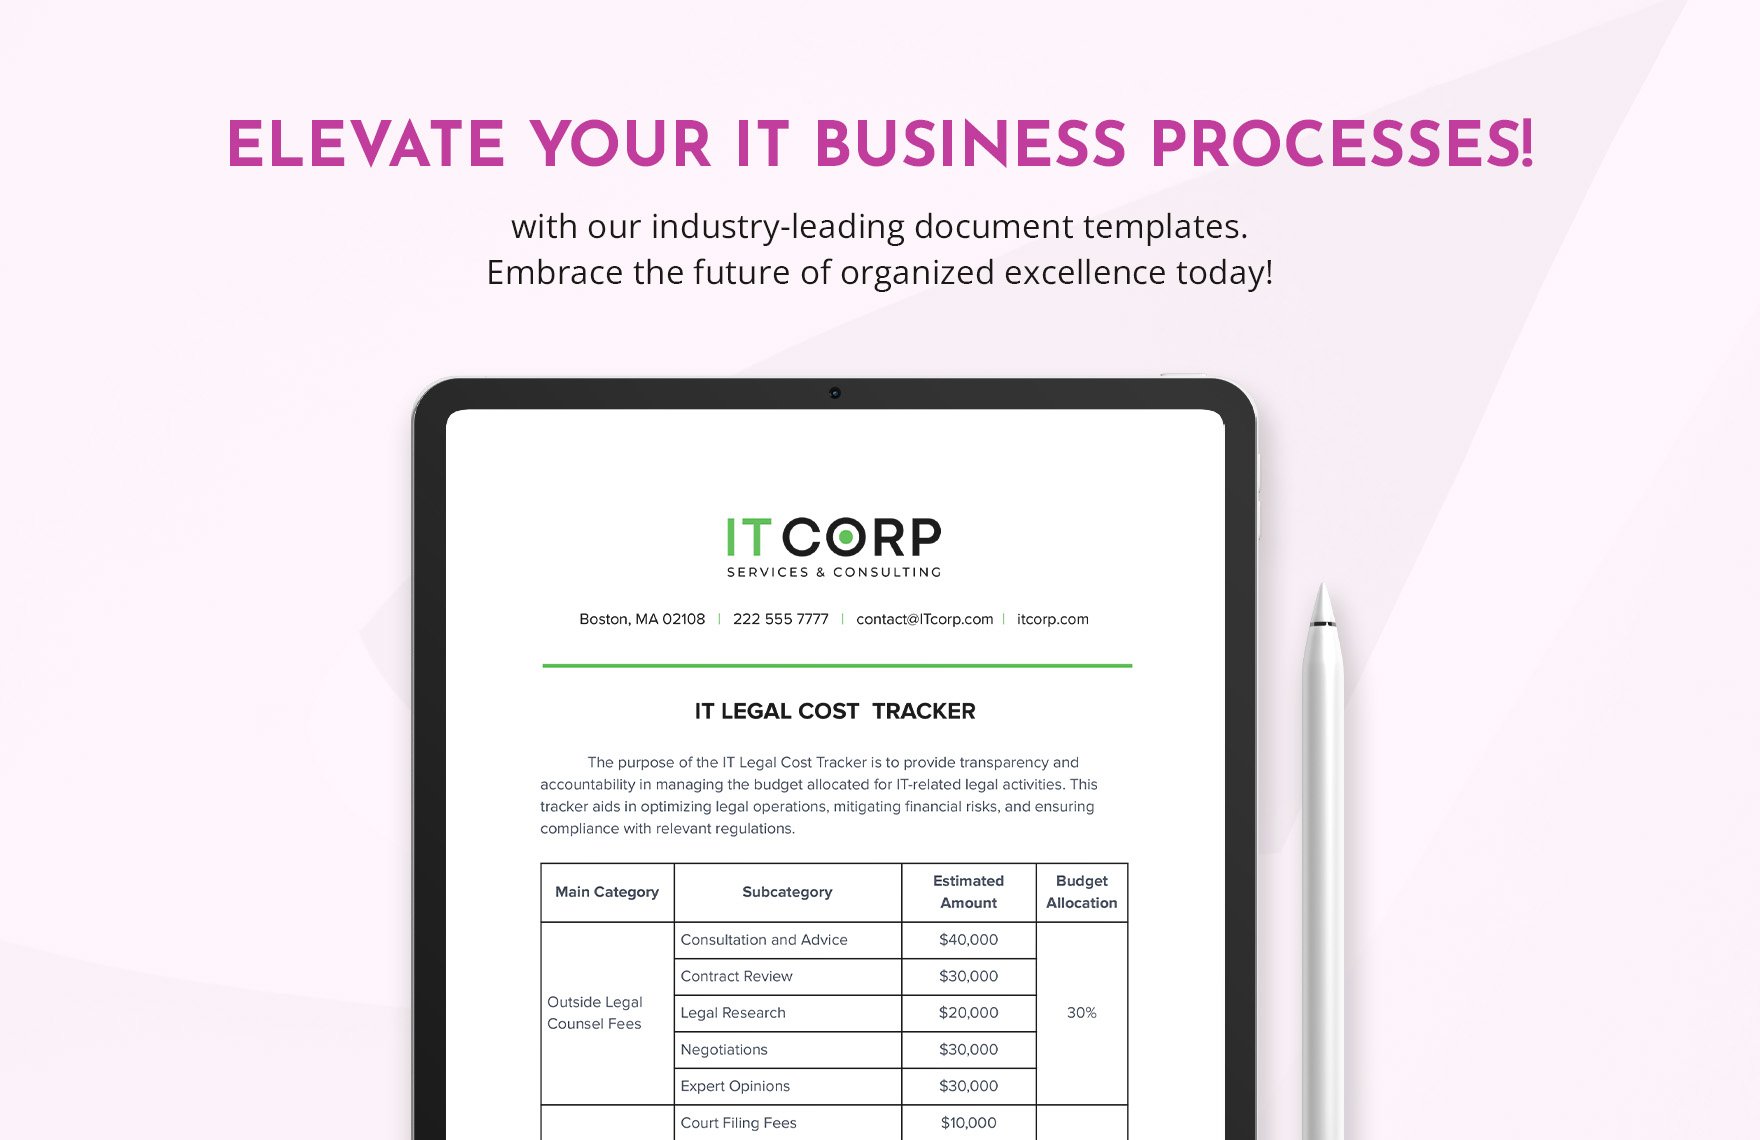 IT Legal Cost Tracker Template